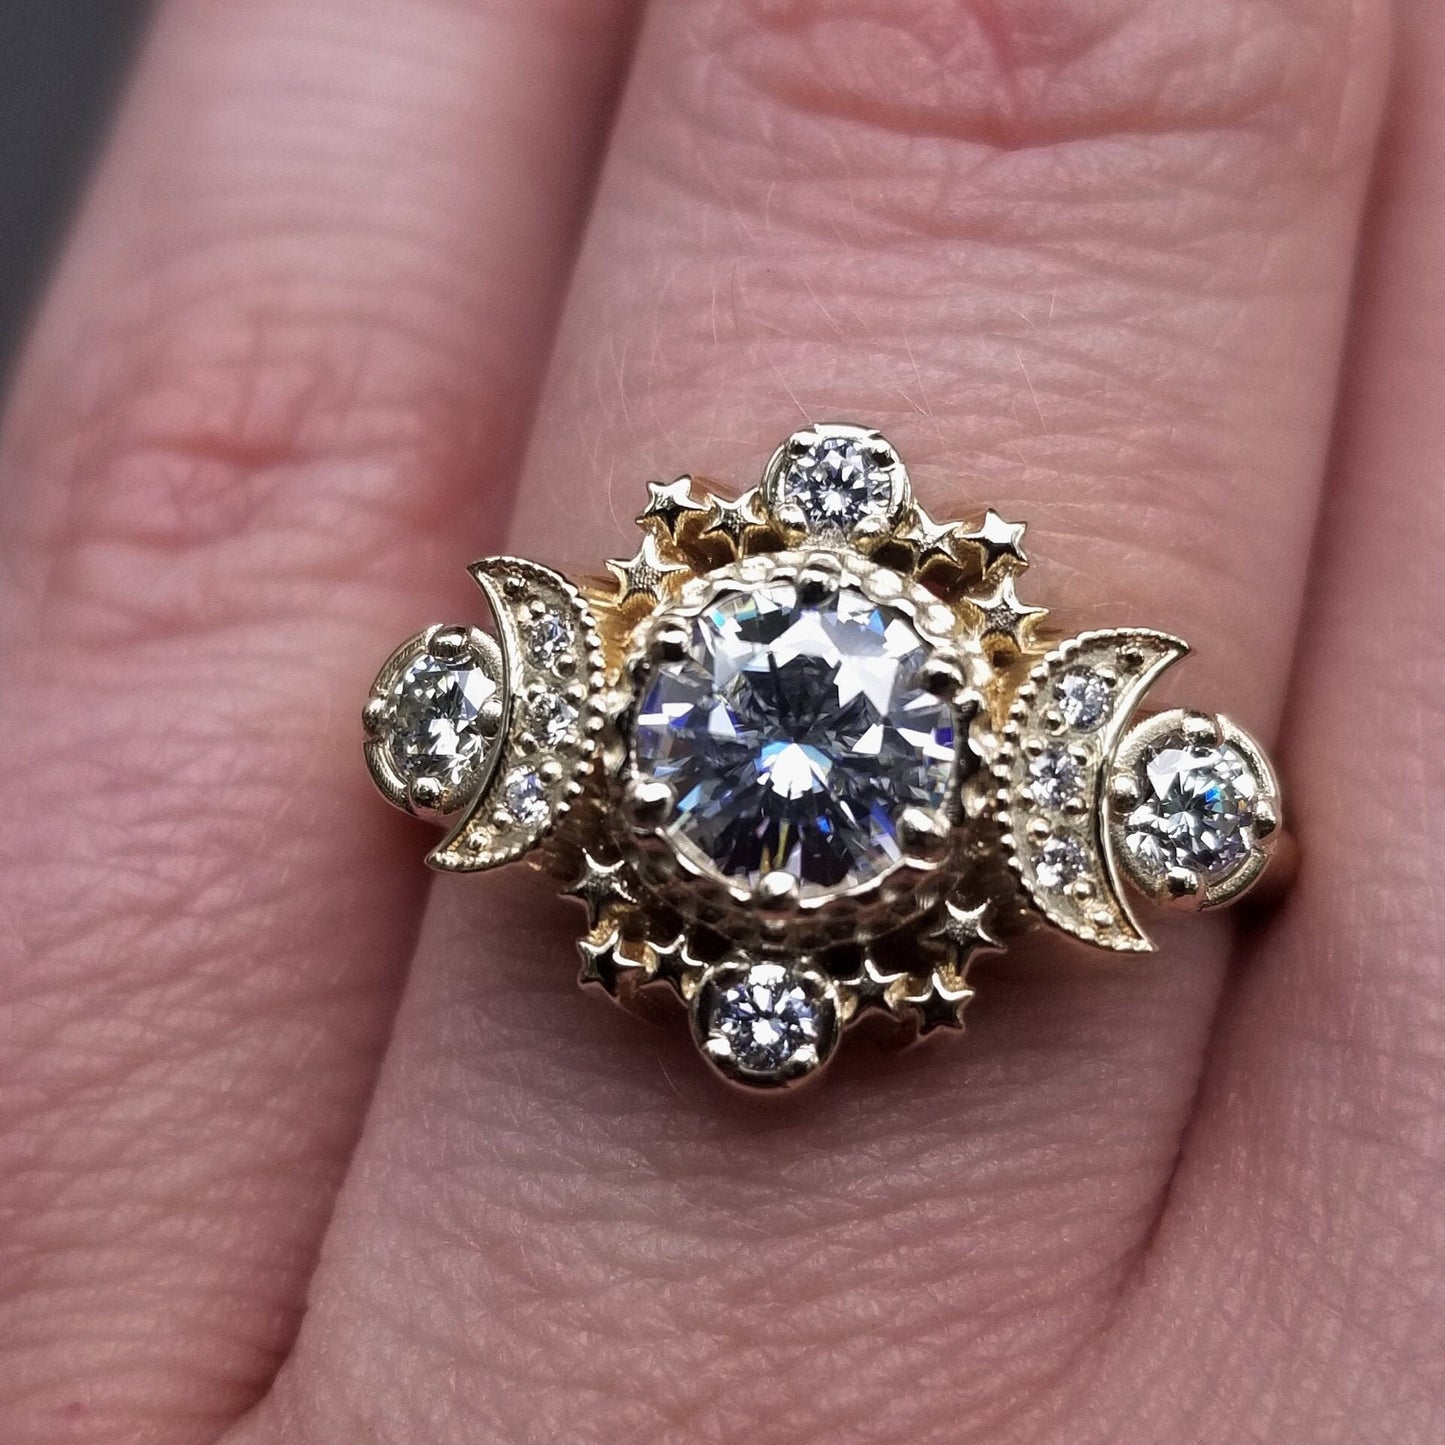 Cosmos Diamond Moon Ring Celestial Engagement - Moissanite or Diamonds Wedding Ring - Pick your Center Stone - Handcrafted Fine Jewelry